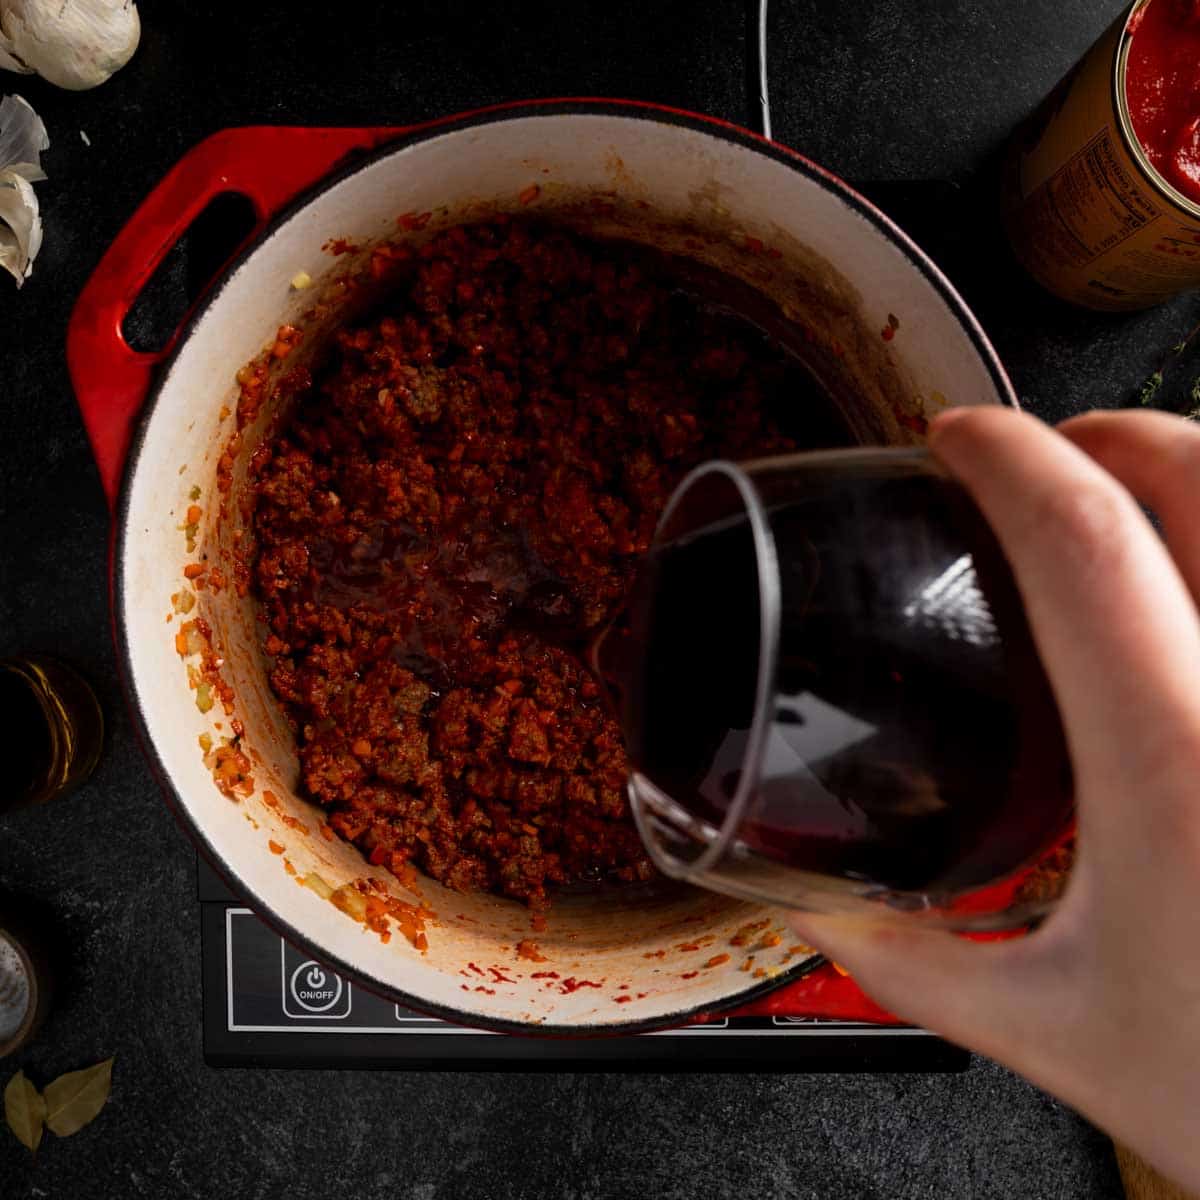 Pouring red wine into the Bolognese sauce